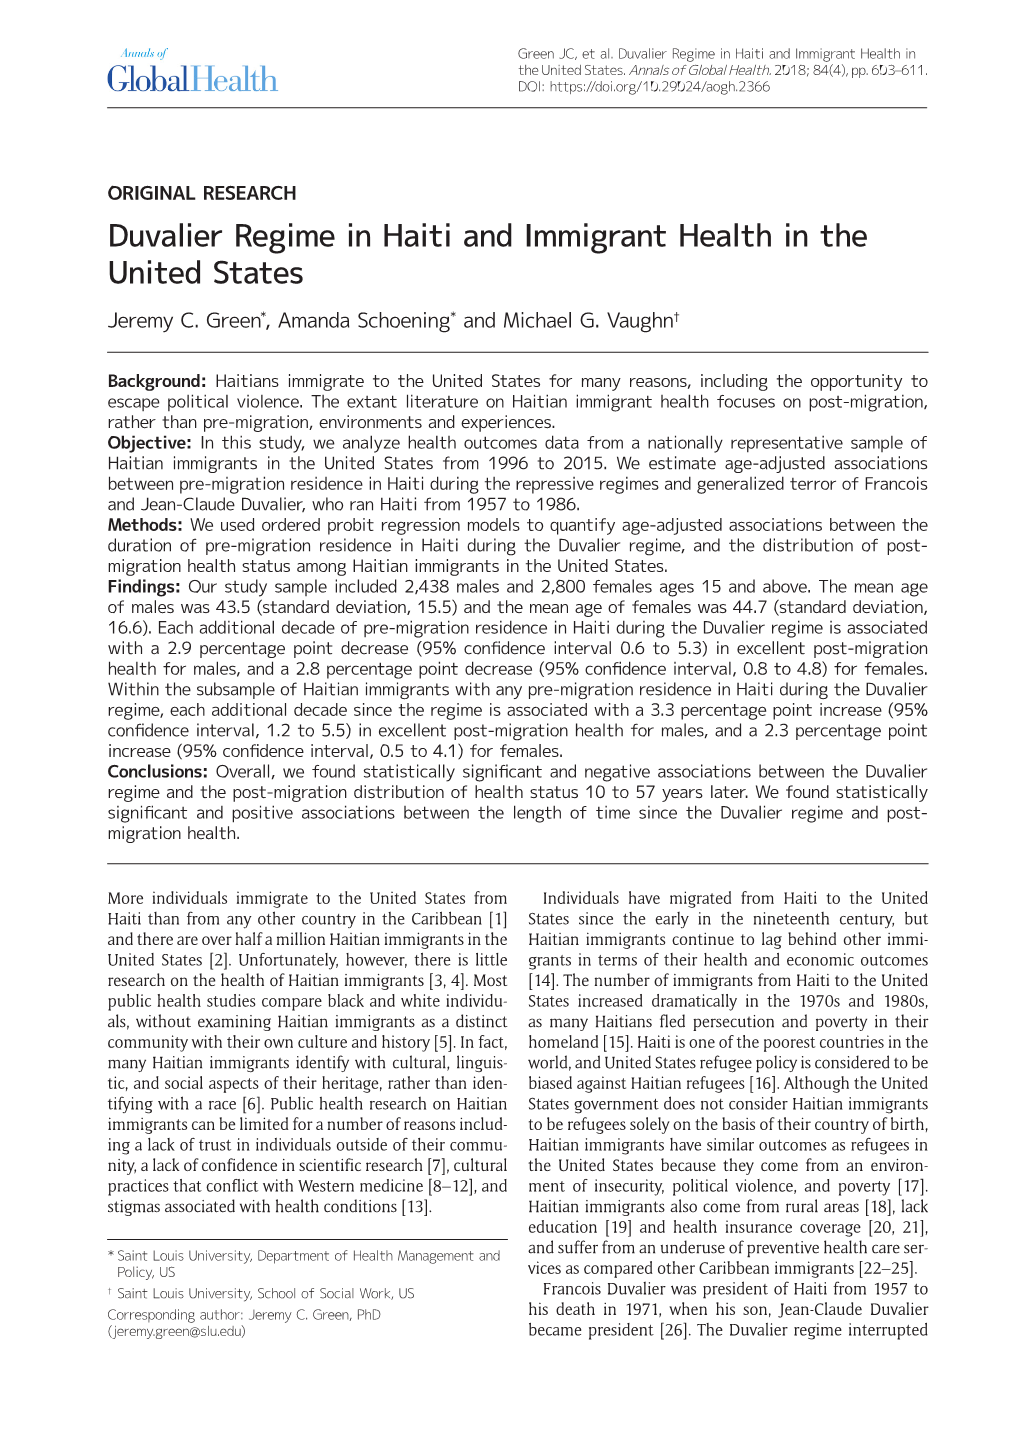 Duvalier Regime in Haiti and Immigrant Health in the United States